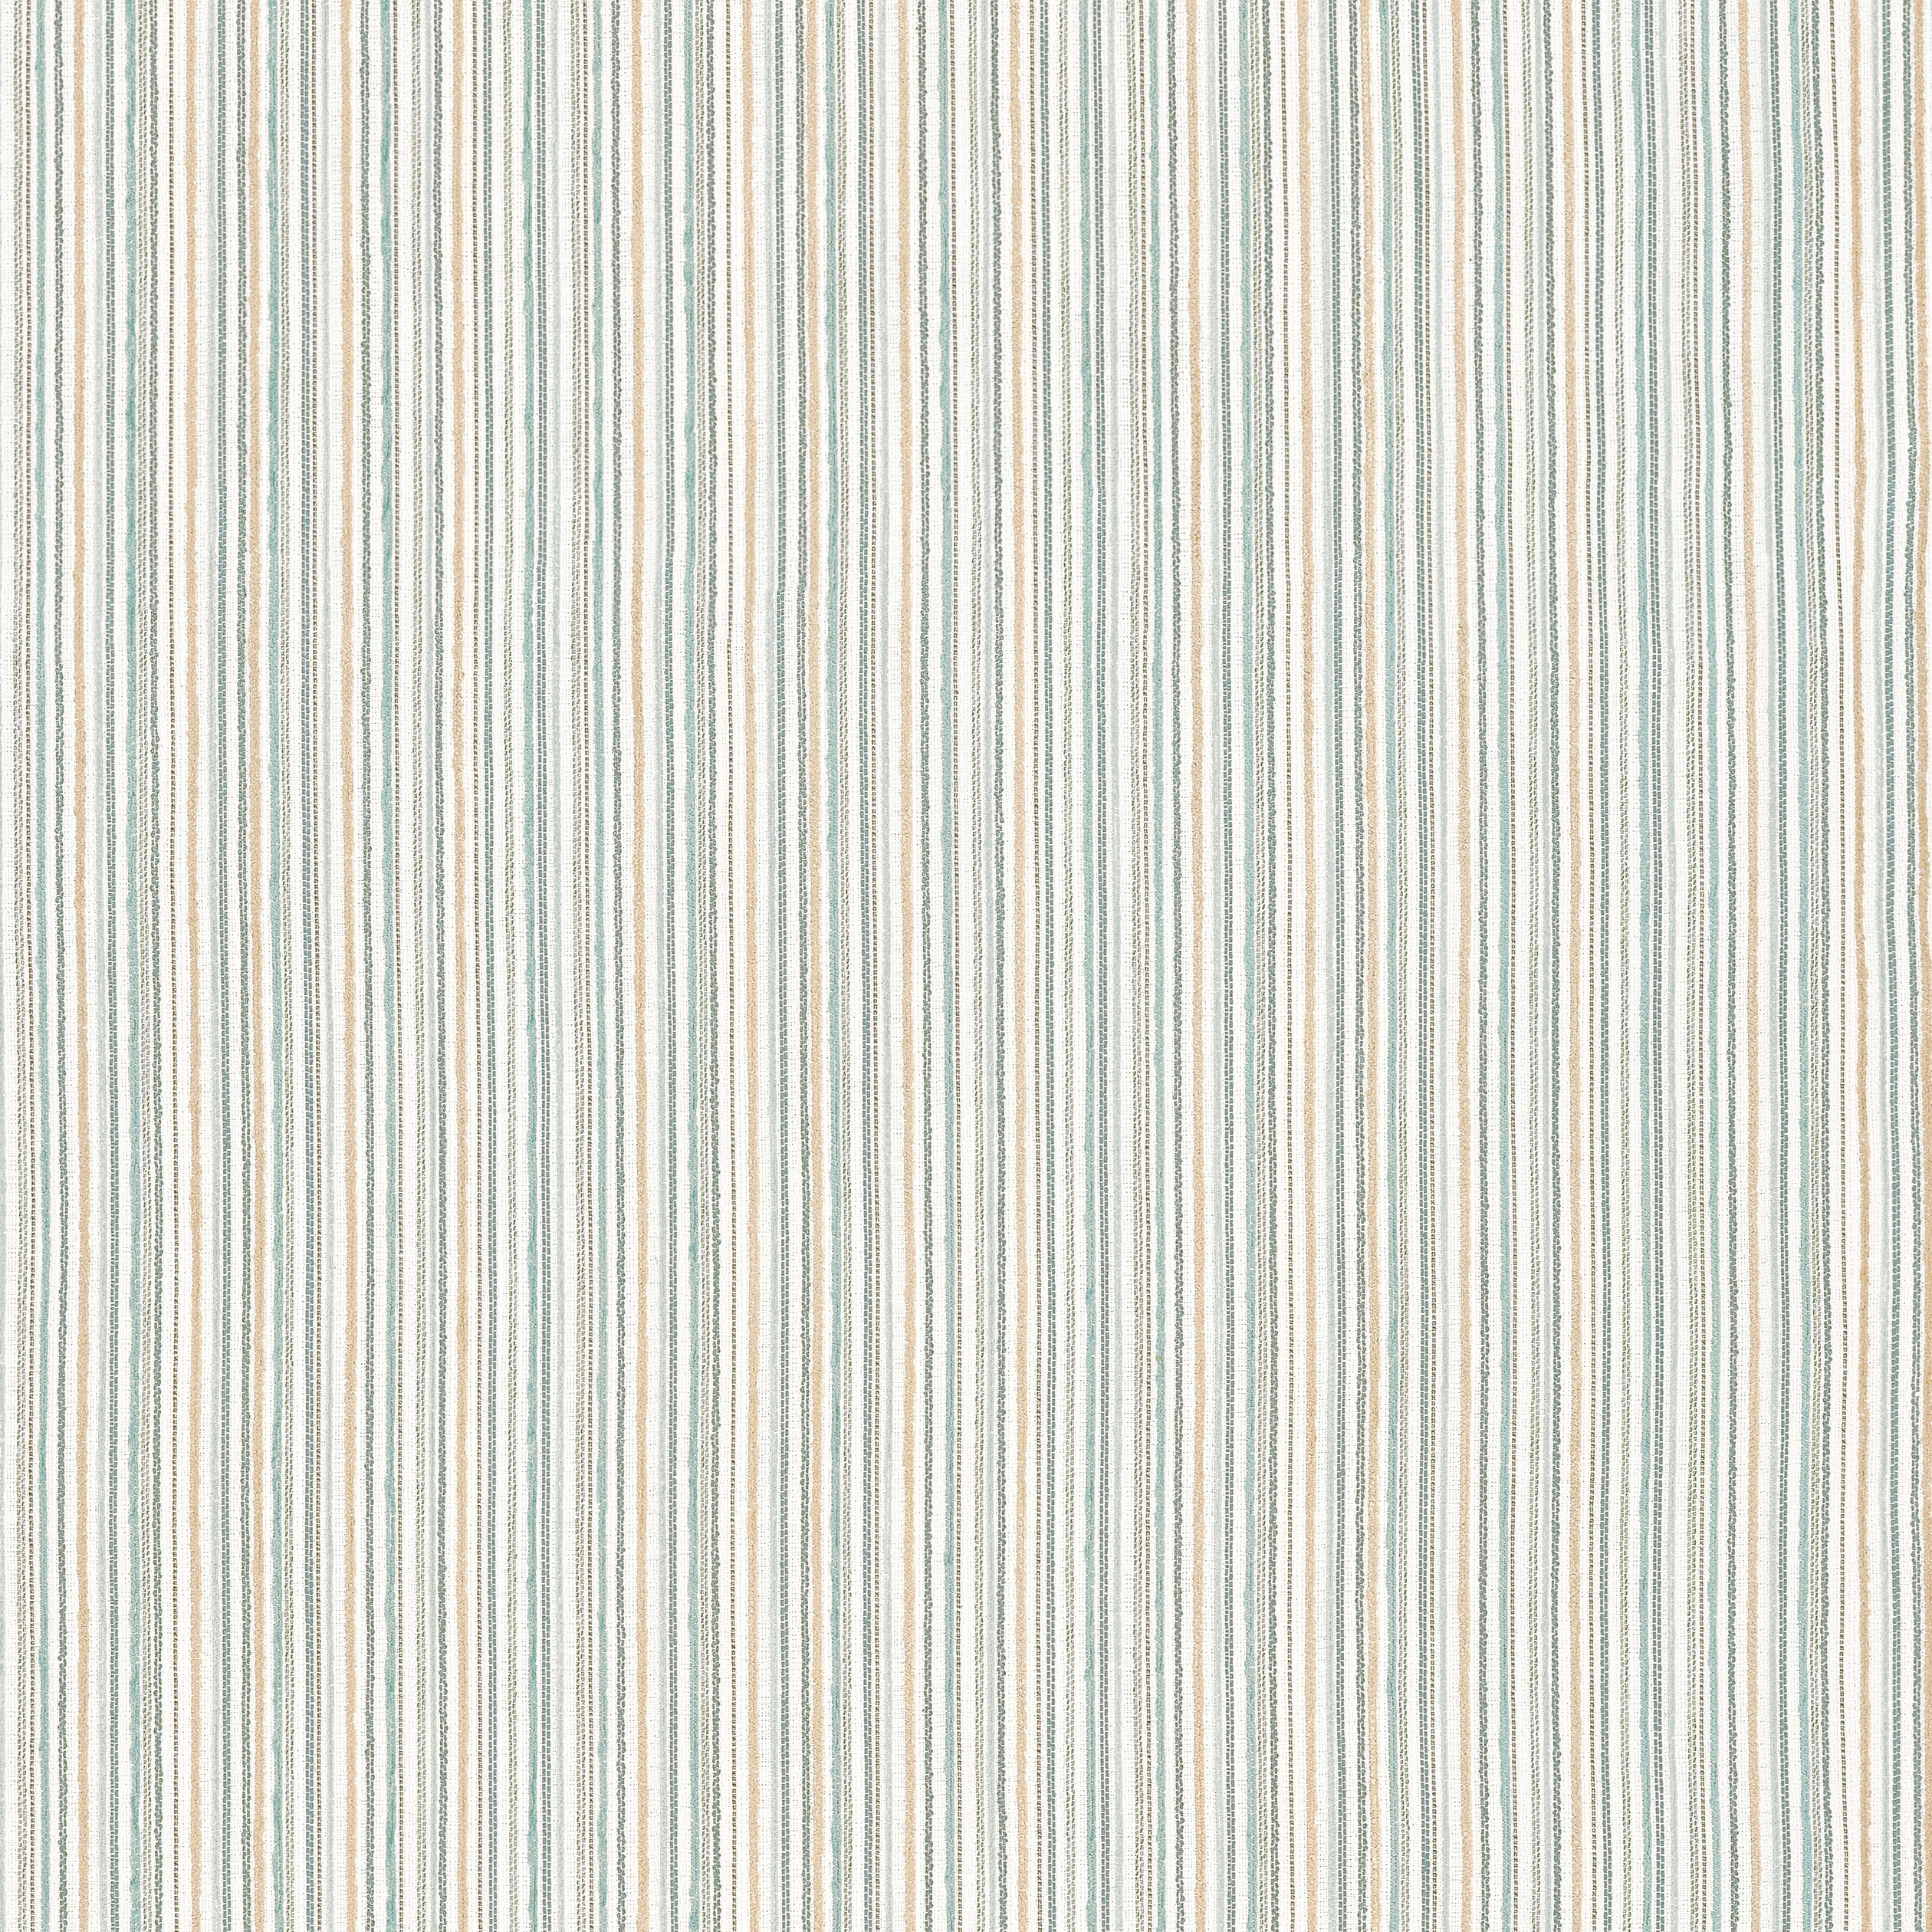 Ernie Stripe fabric in mineral color - pattern number W81943 - by Thibaut in the Companions collection